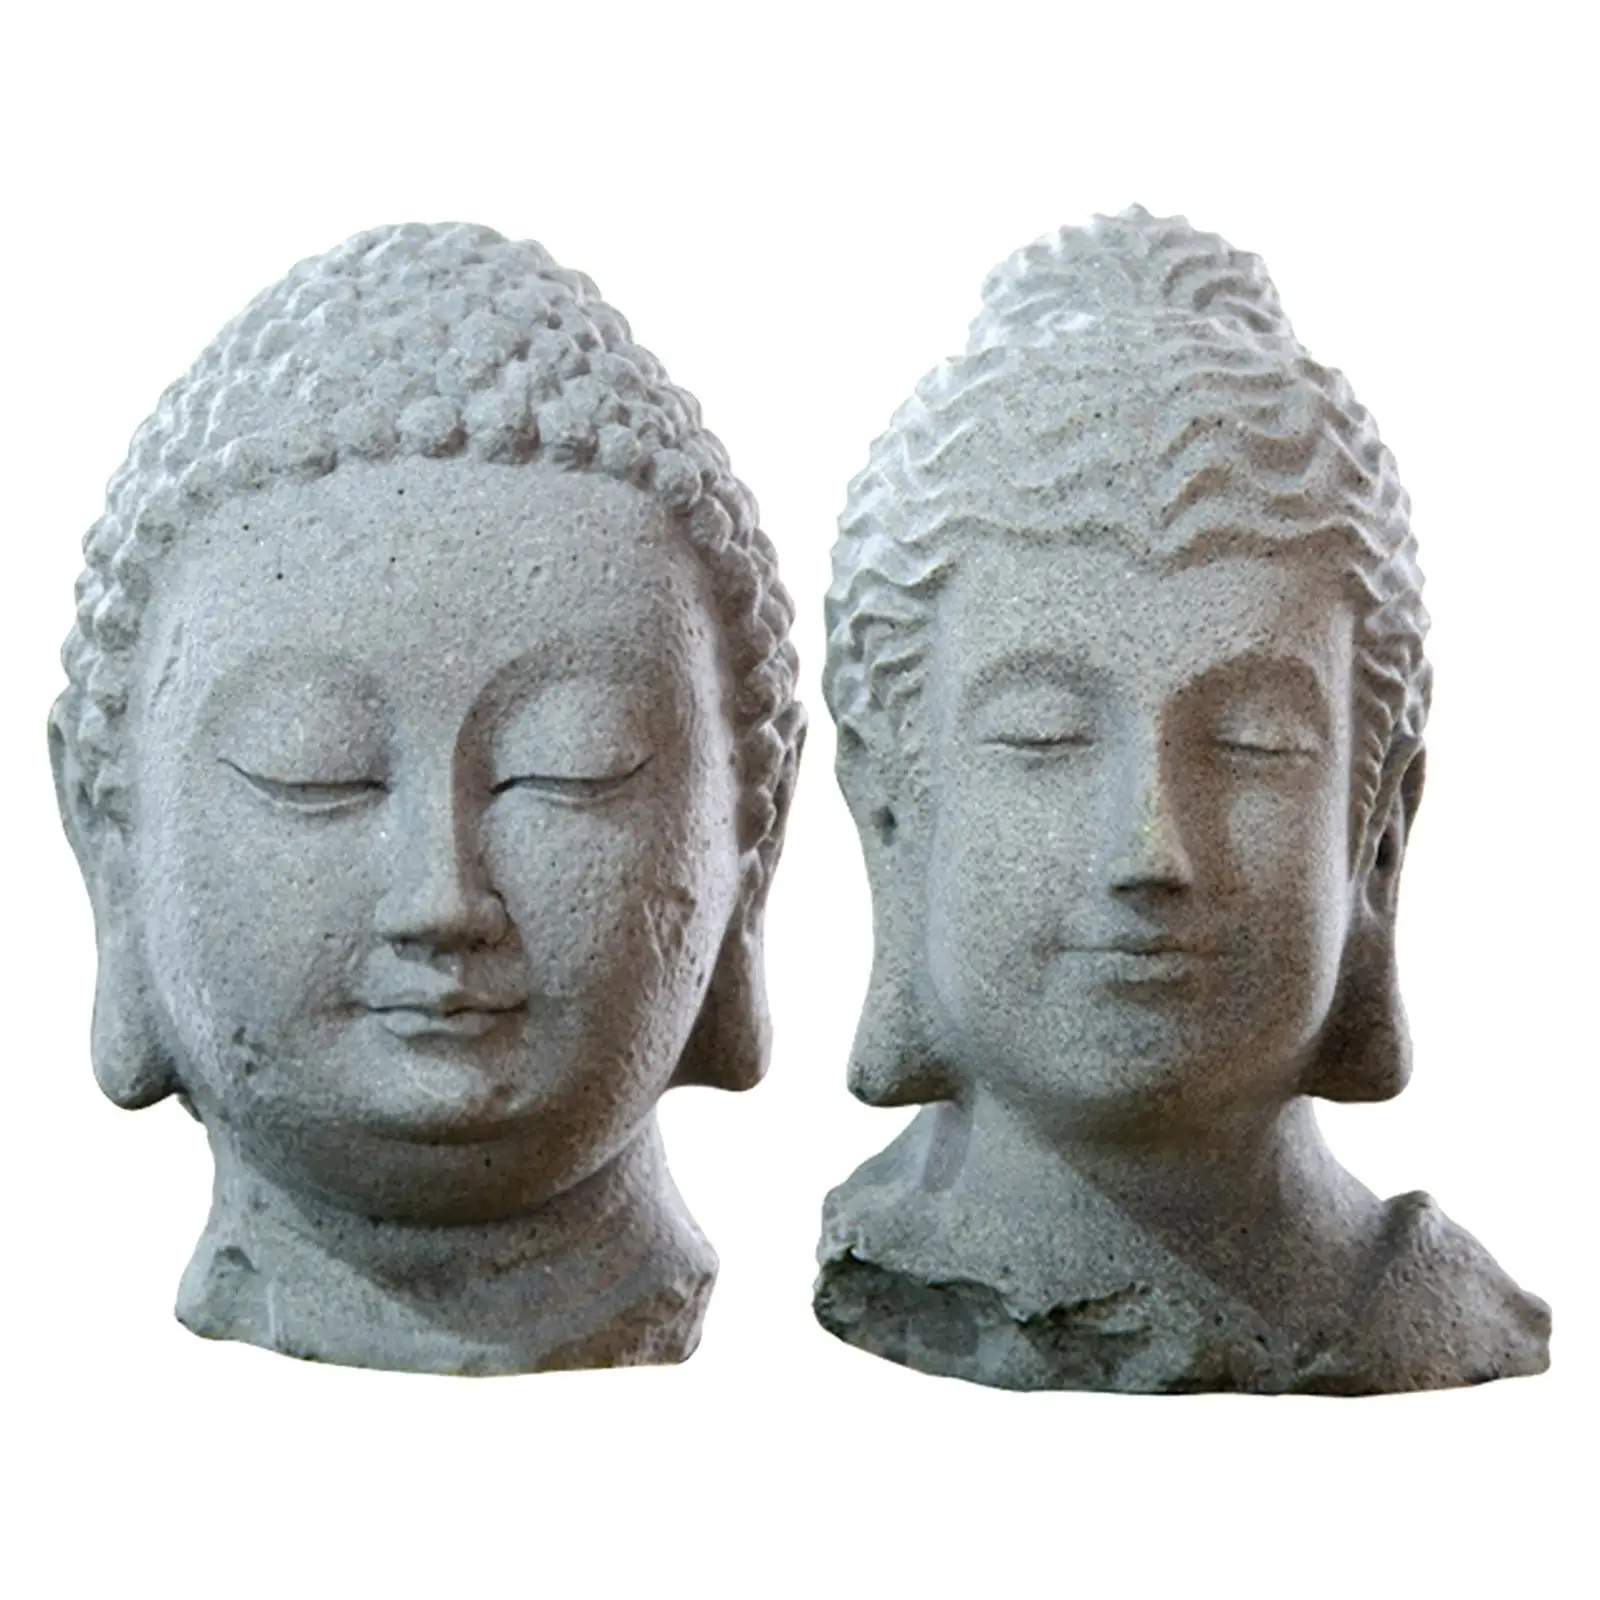 

Resin Fish Tank Buddha Head Sculpture Indoor Decoration Unique Scenery with Textured Appearance Details Fine Workmanship Durable